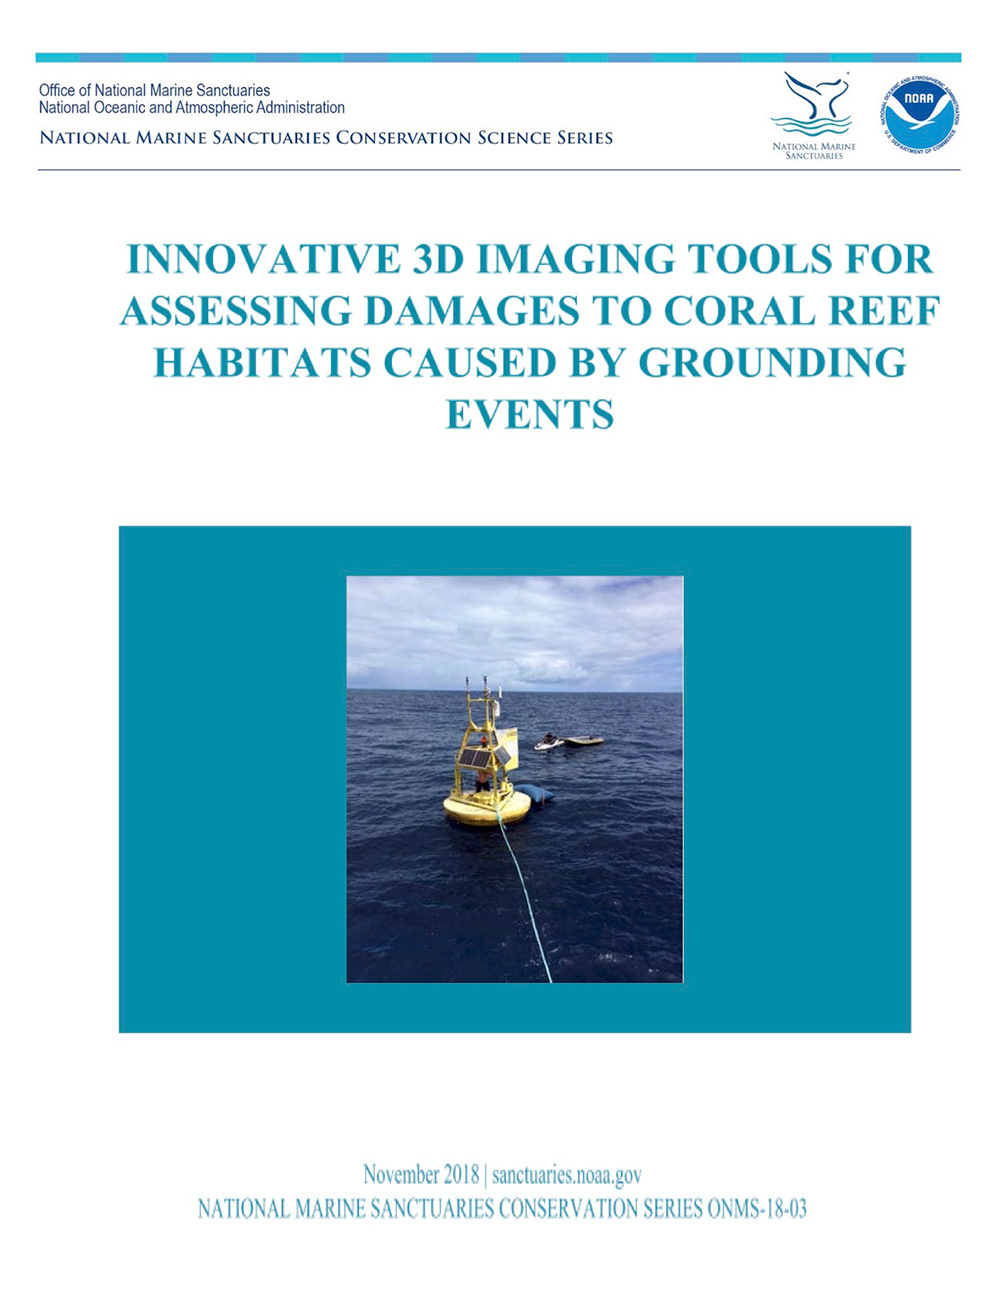 Innovative 3D Imaging Tools for Assessing Damages To Coral Reef Habitats Caused By Grounding Events